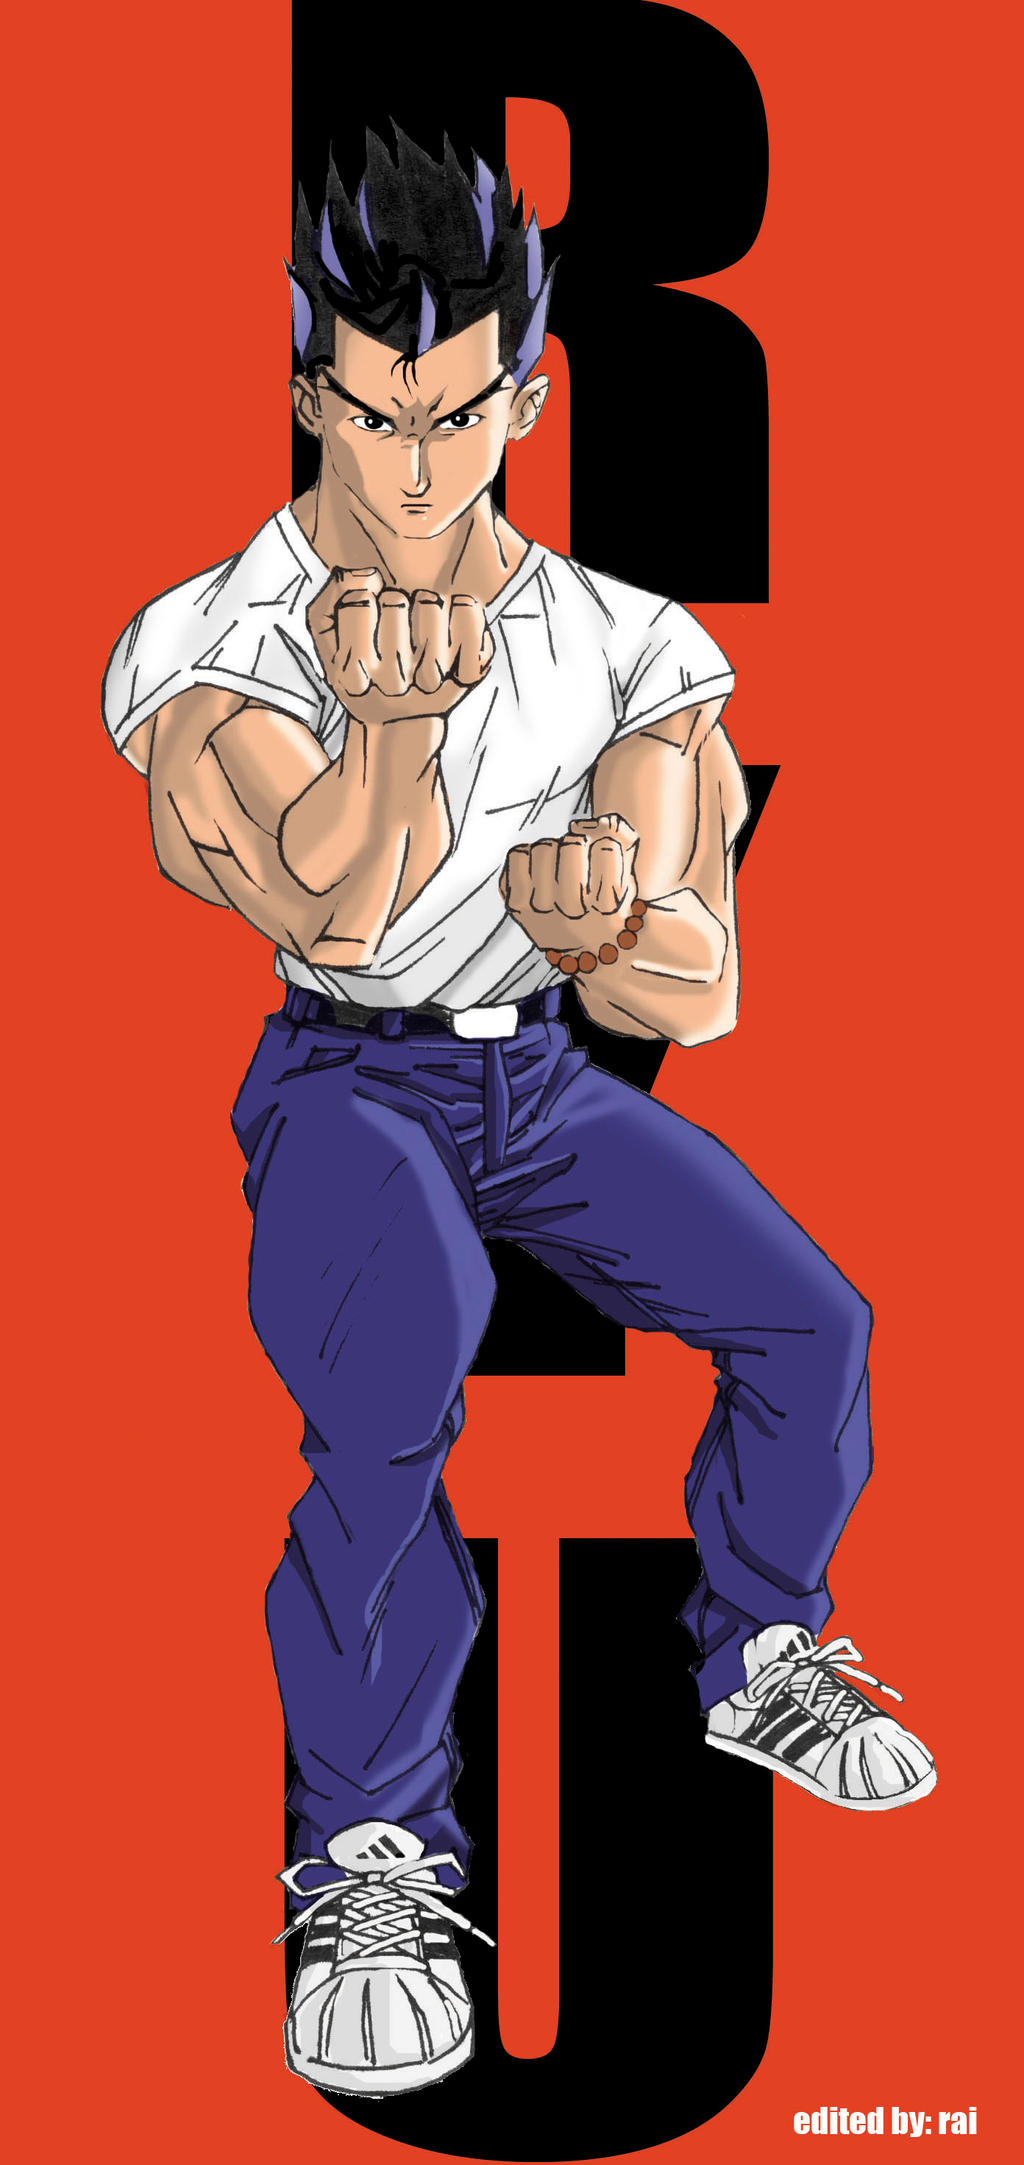 Street Fighter - Ryu Victory Stance | Poster